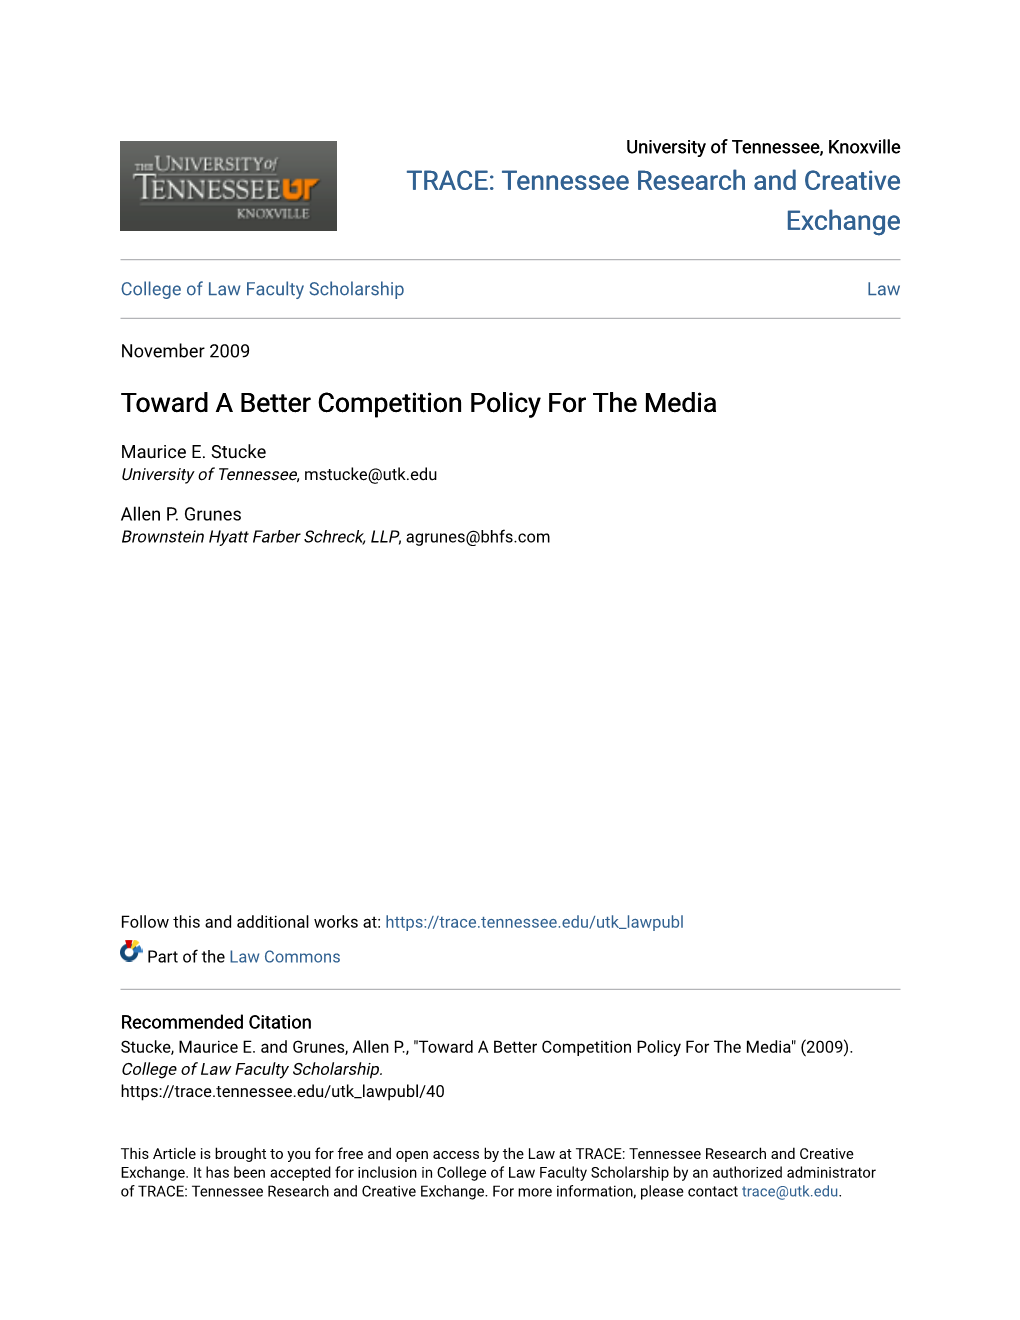 Toward a Better Competition Policy for the Media